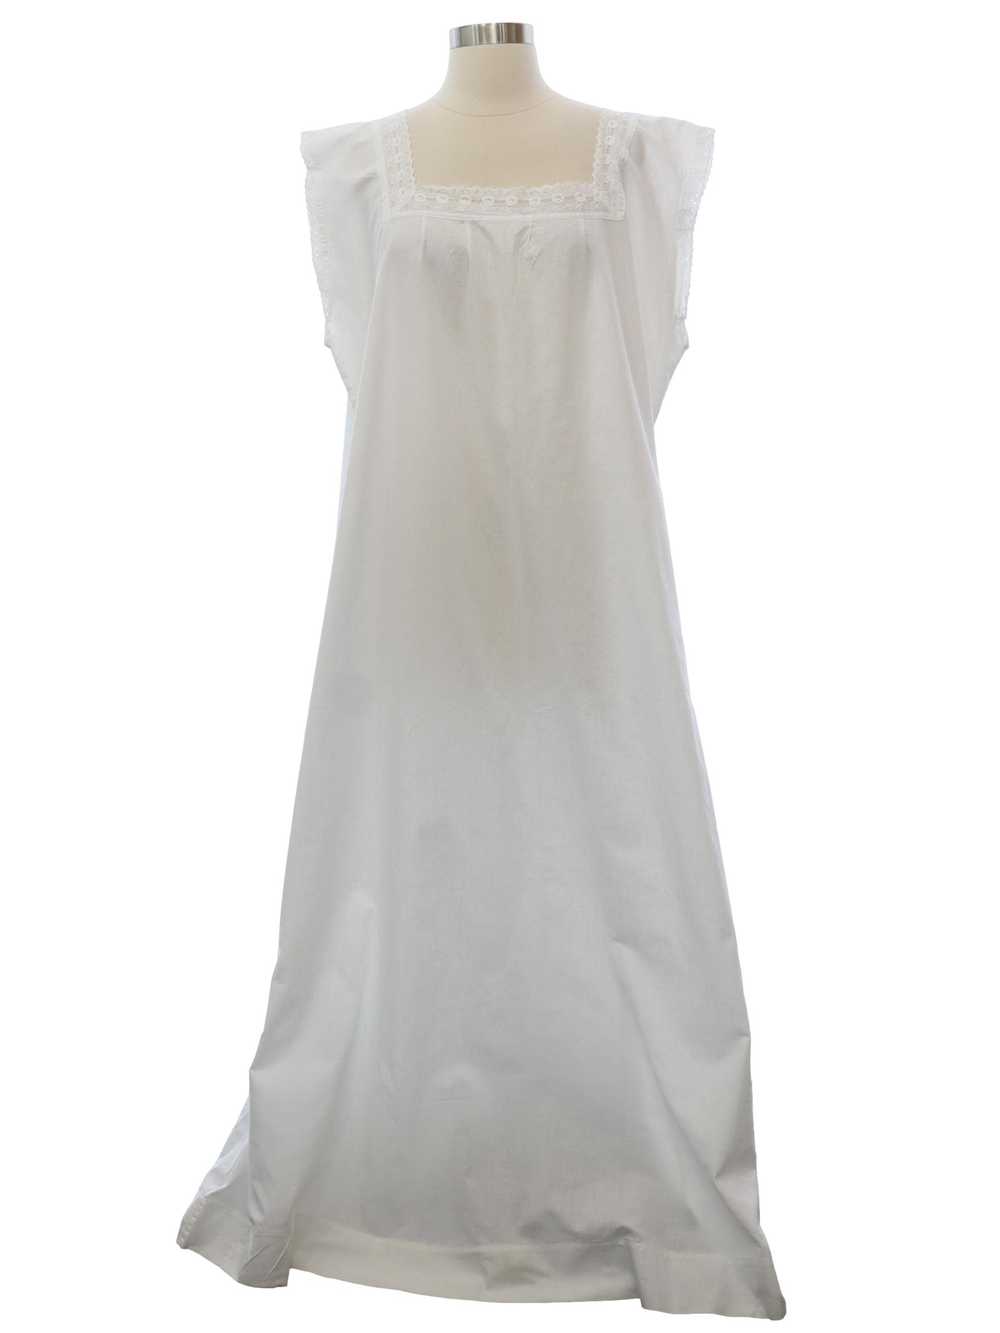 1920's Womens Lingerie - Nightgown - image 1